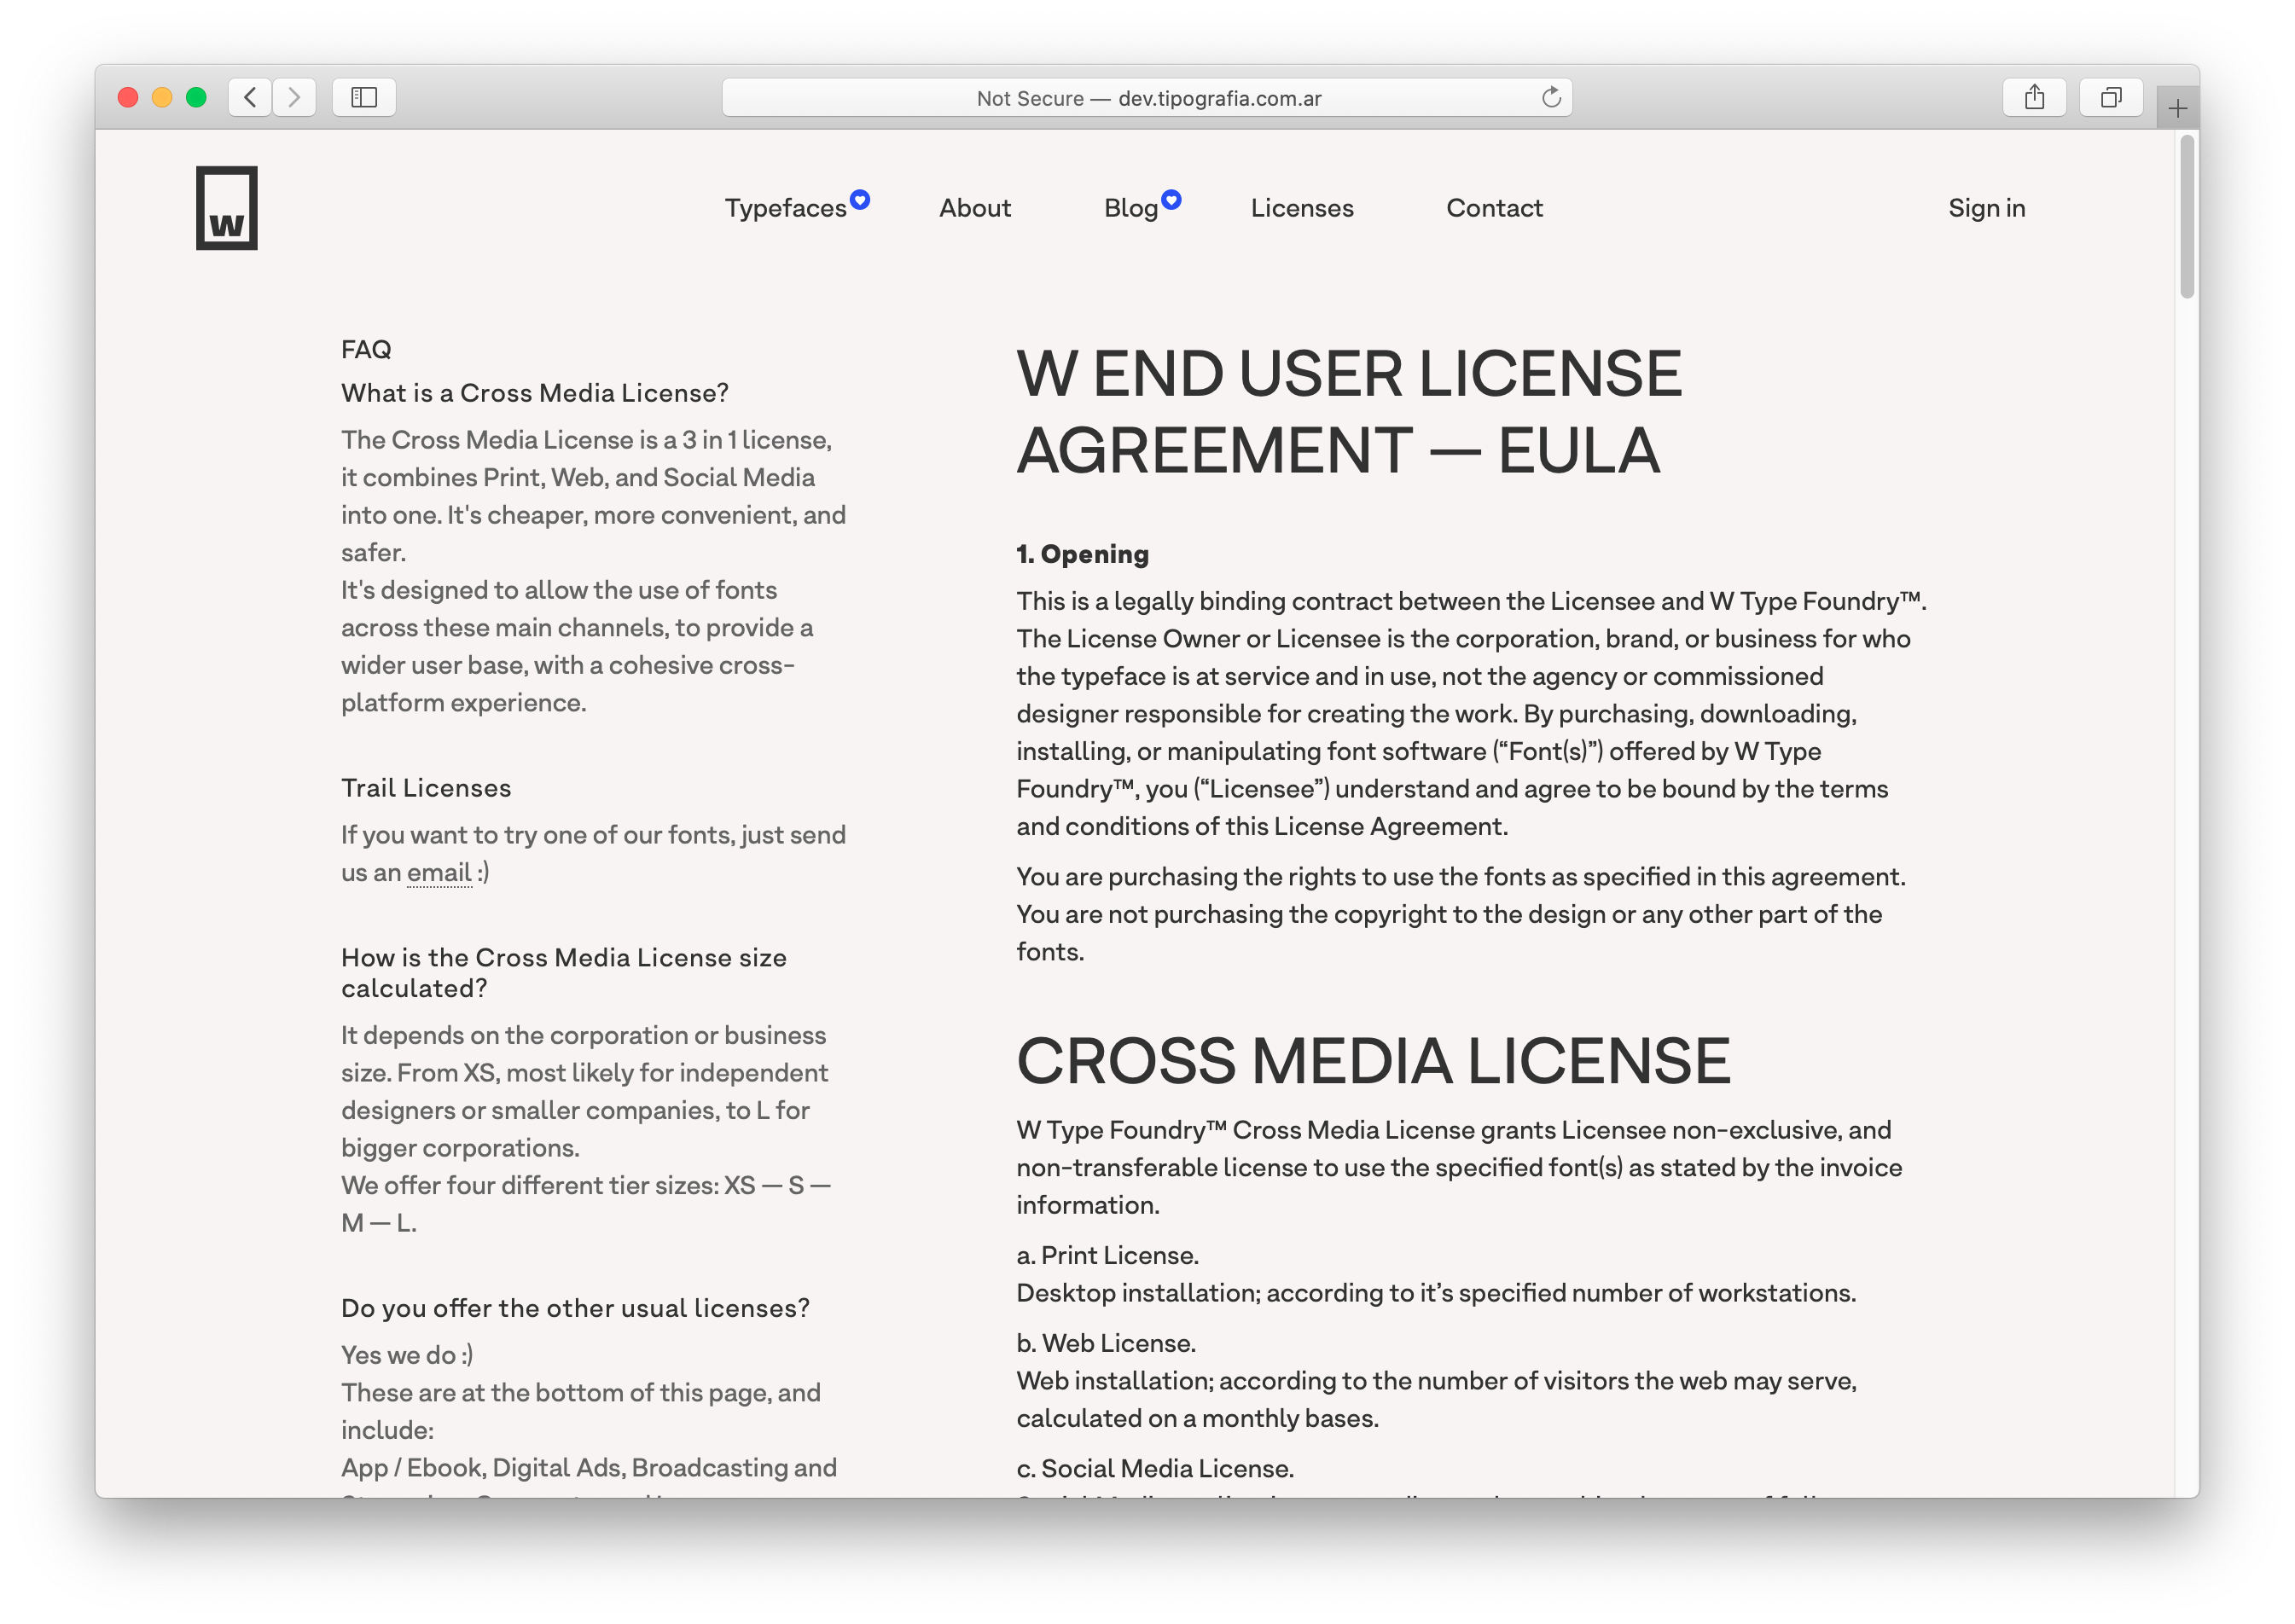 The new W Type Foundry website EULA